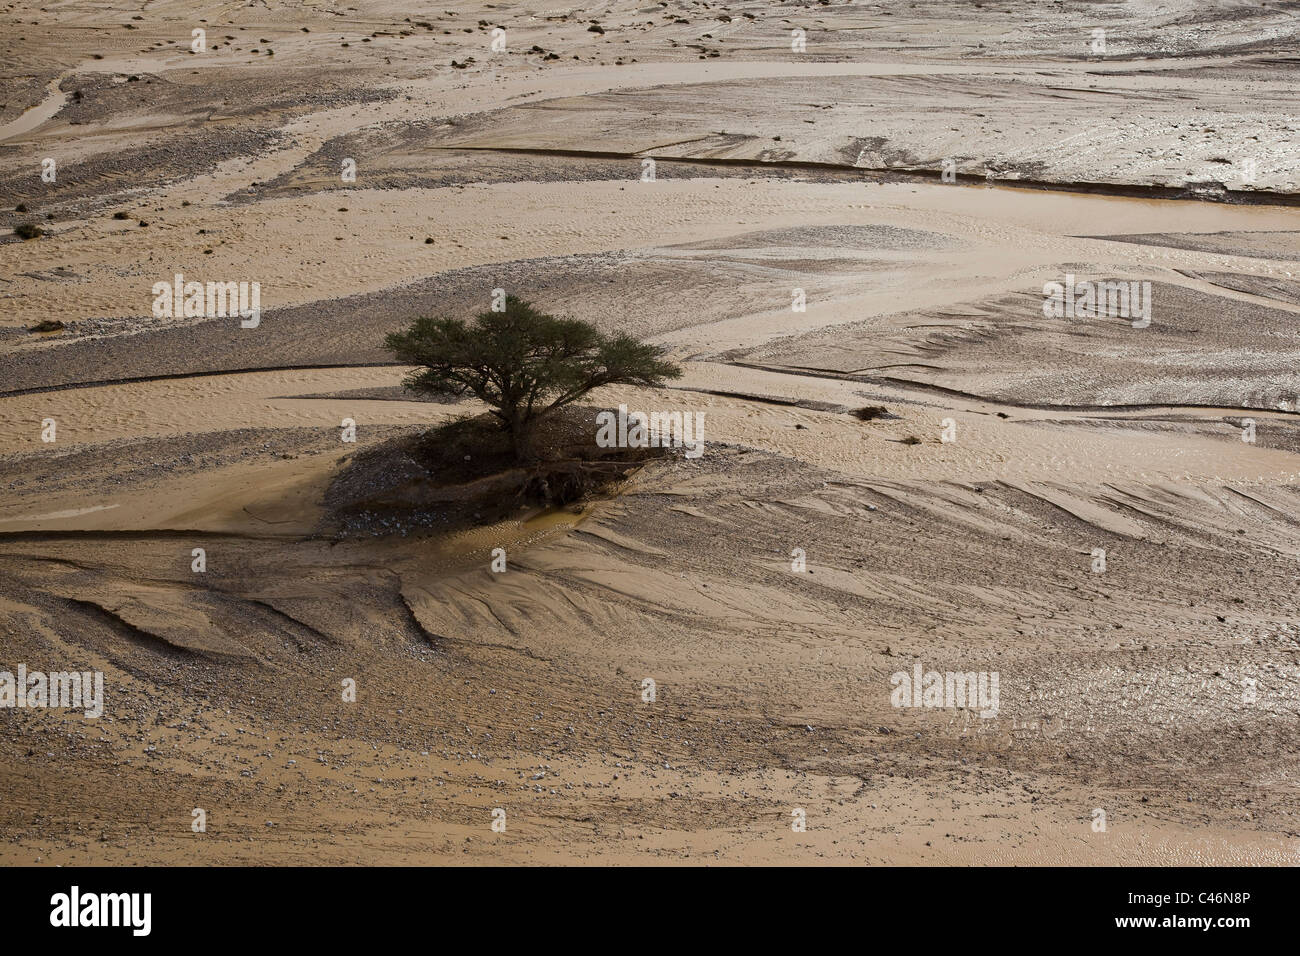 Aerial photograph of a single tree in the middle of the flooded Paran wadi Stock Photo